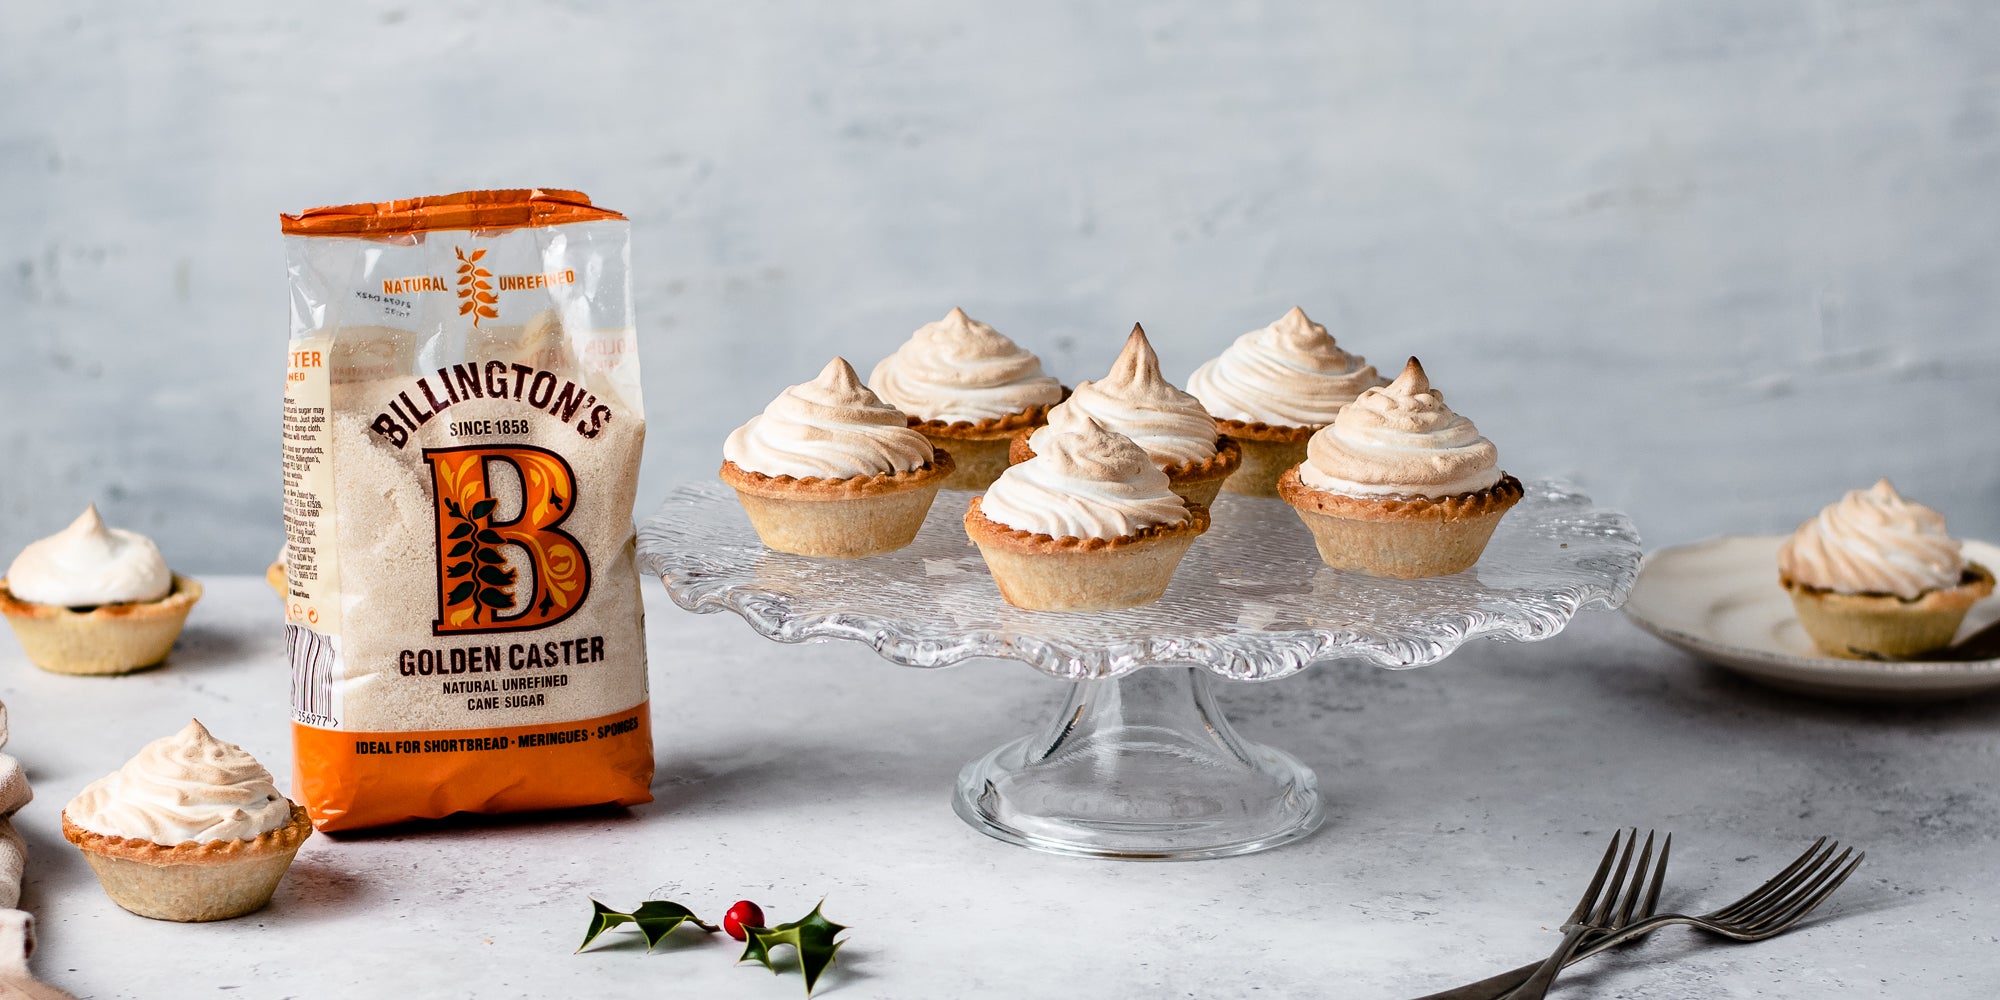 Meringue Topped Mince Pies on a glass cake stand next to a bag of Billington's Golden caster sugar